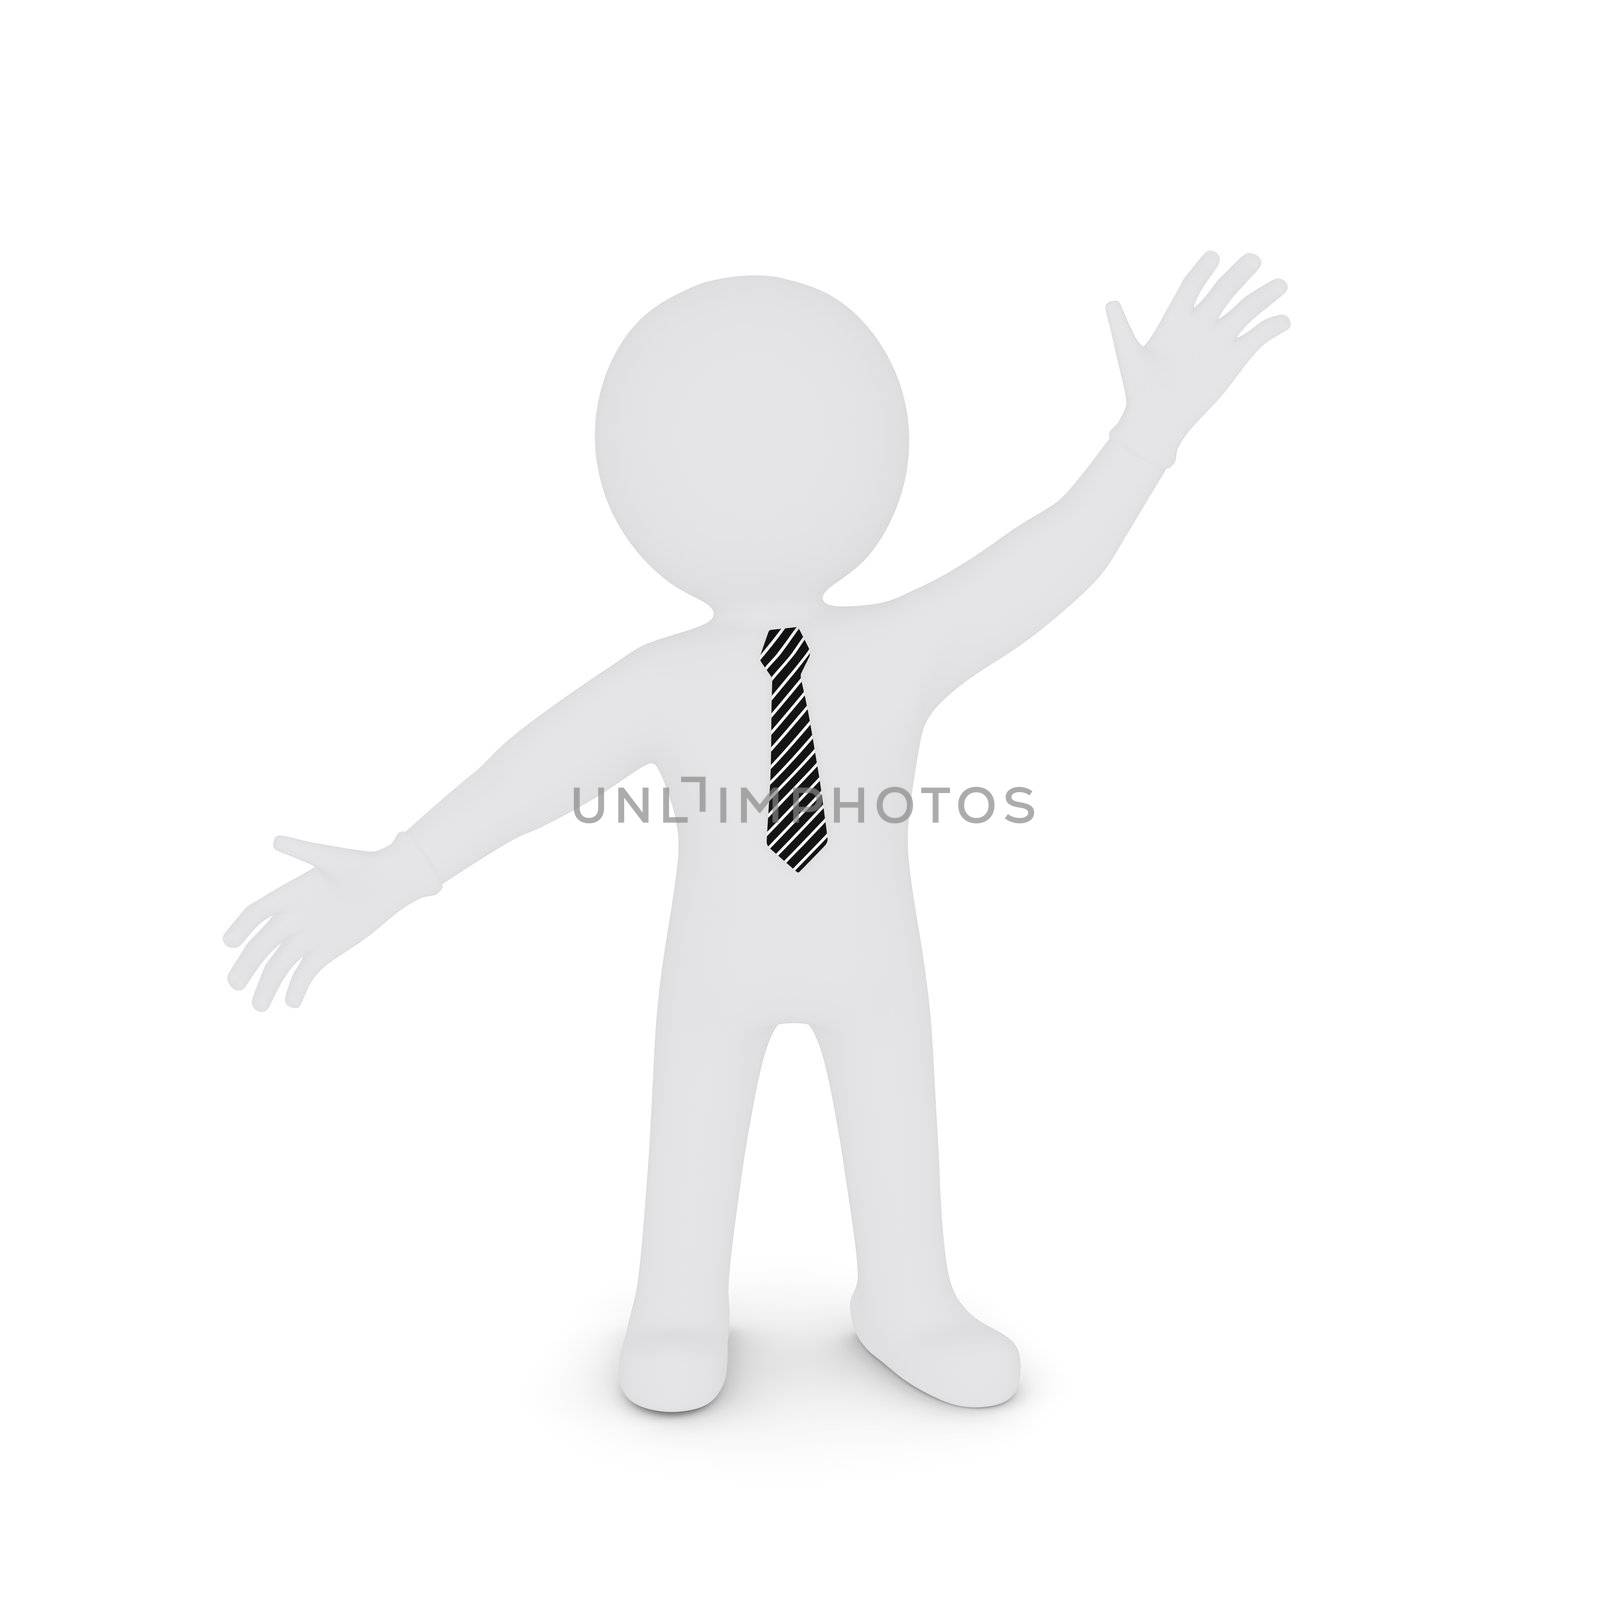 The white man spread his hands apart on the diagonal. Isolated on white background